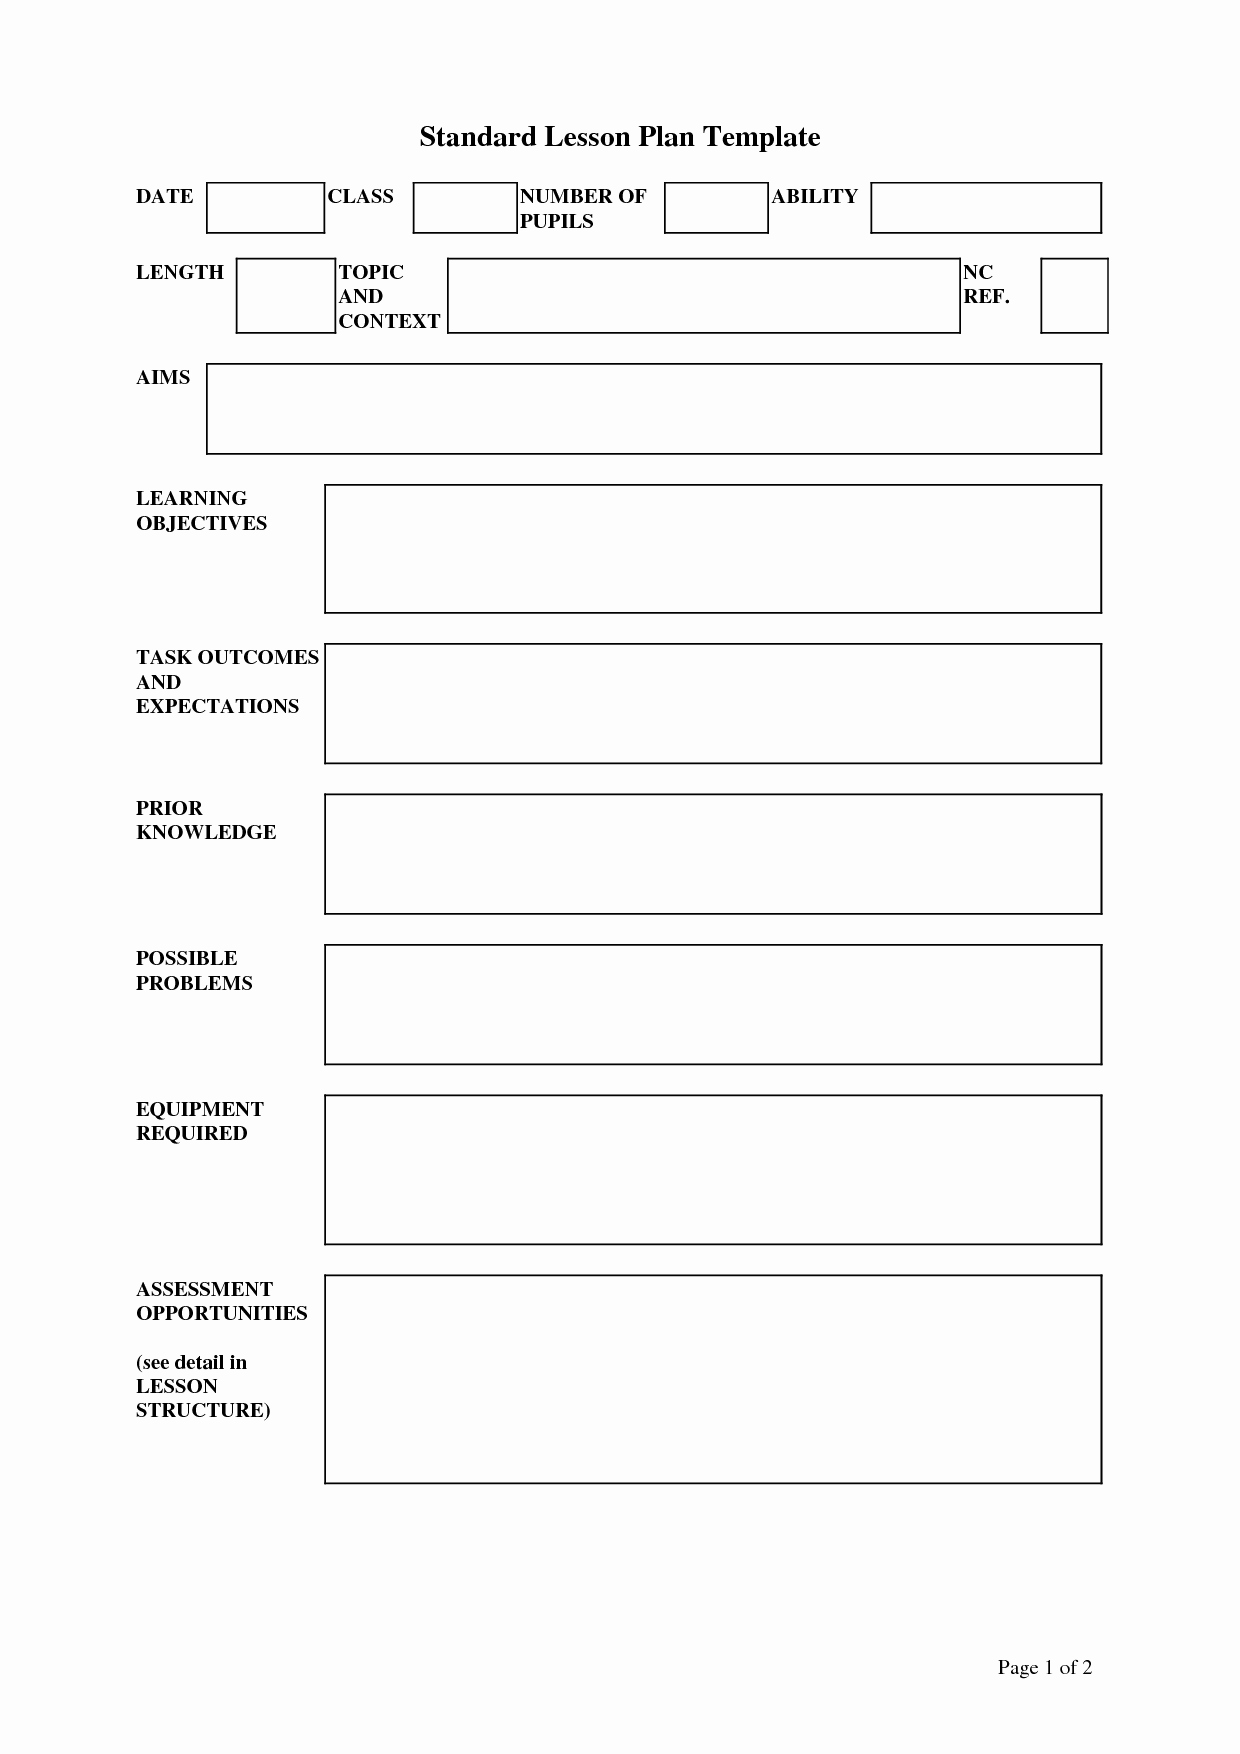 Standard Based Lesson Plan Template New Lesson Plan Template